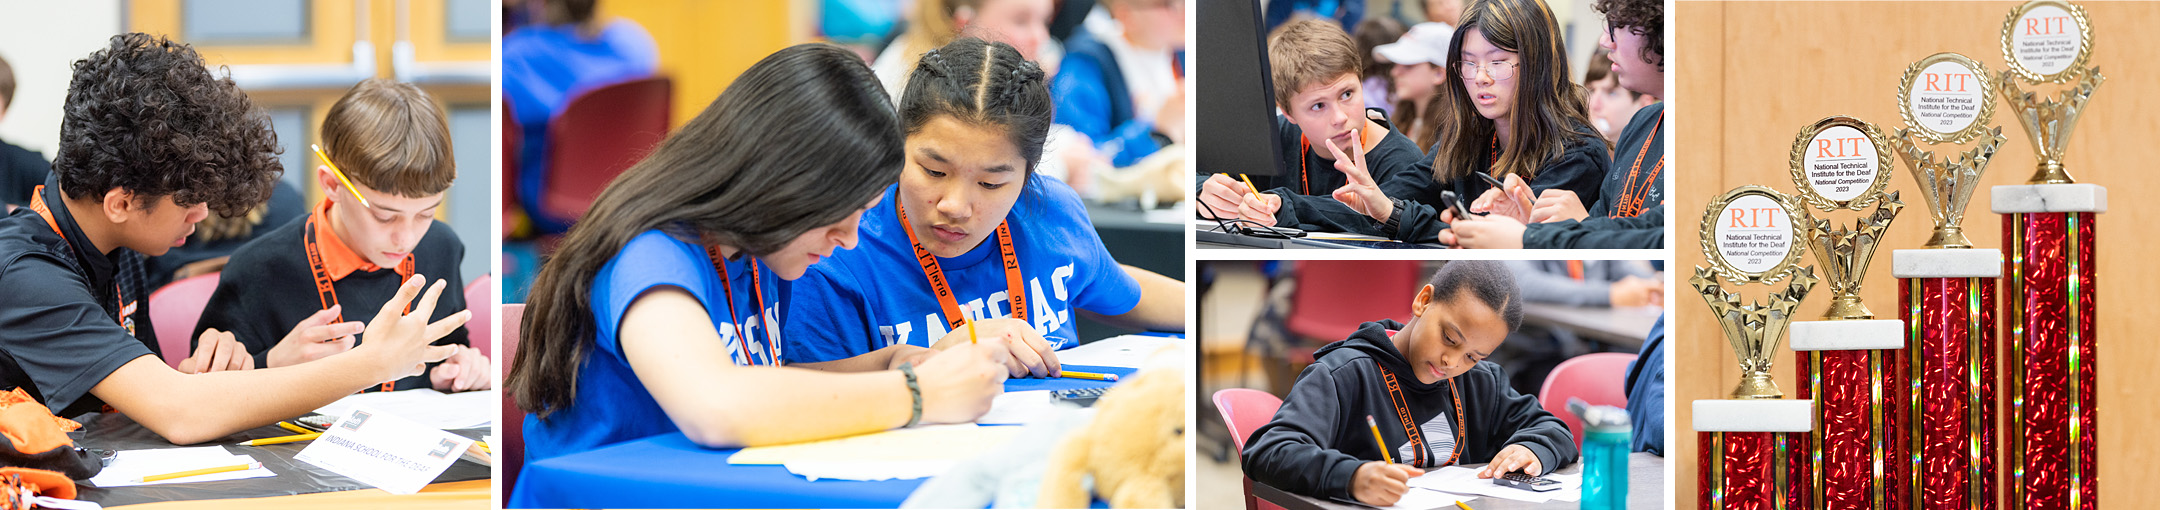 Collage of photos from Math Competition